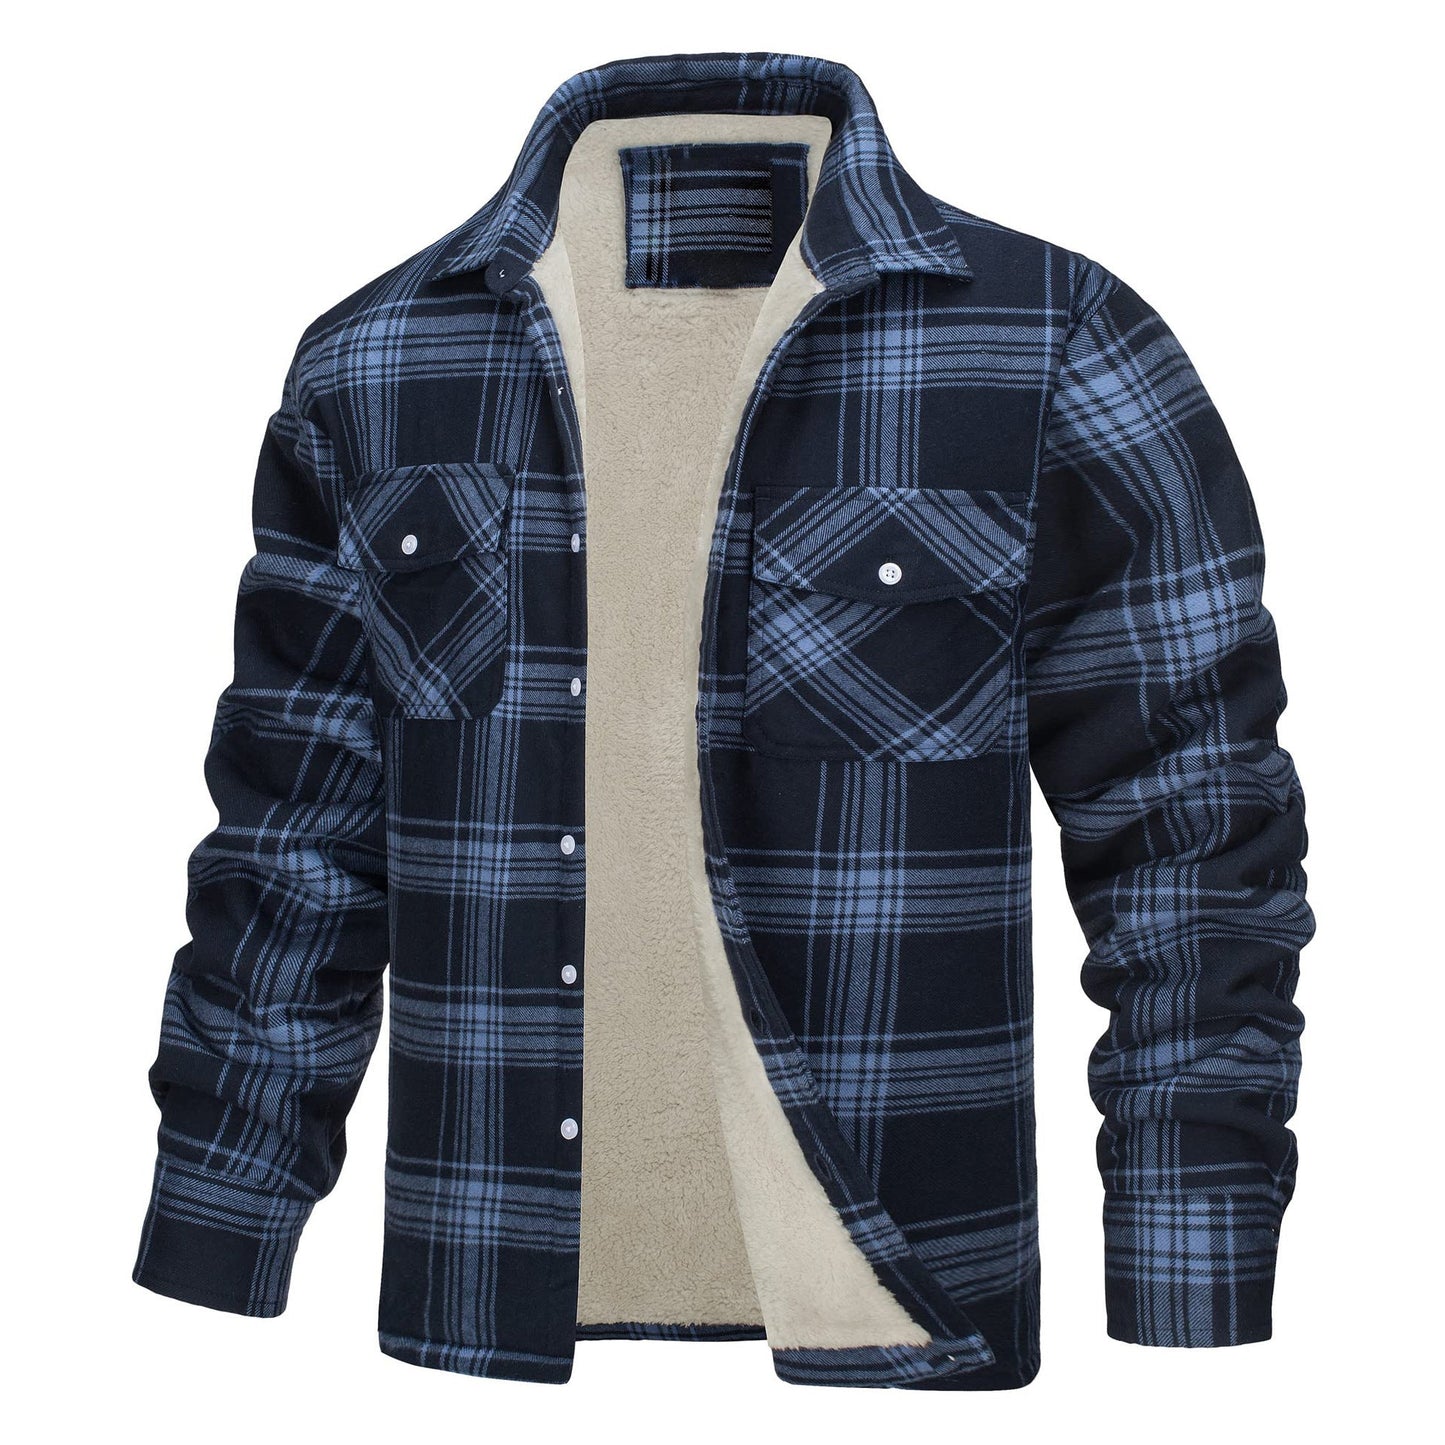 Casual Long Sleeves Thicken Shirts Jackets for Men-Blue-S-Free Shipping at meselling99